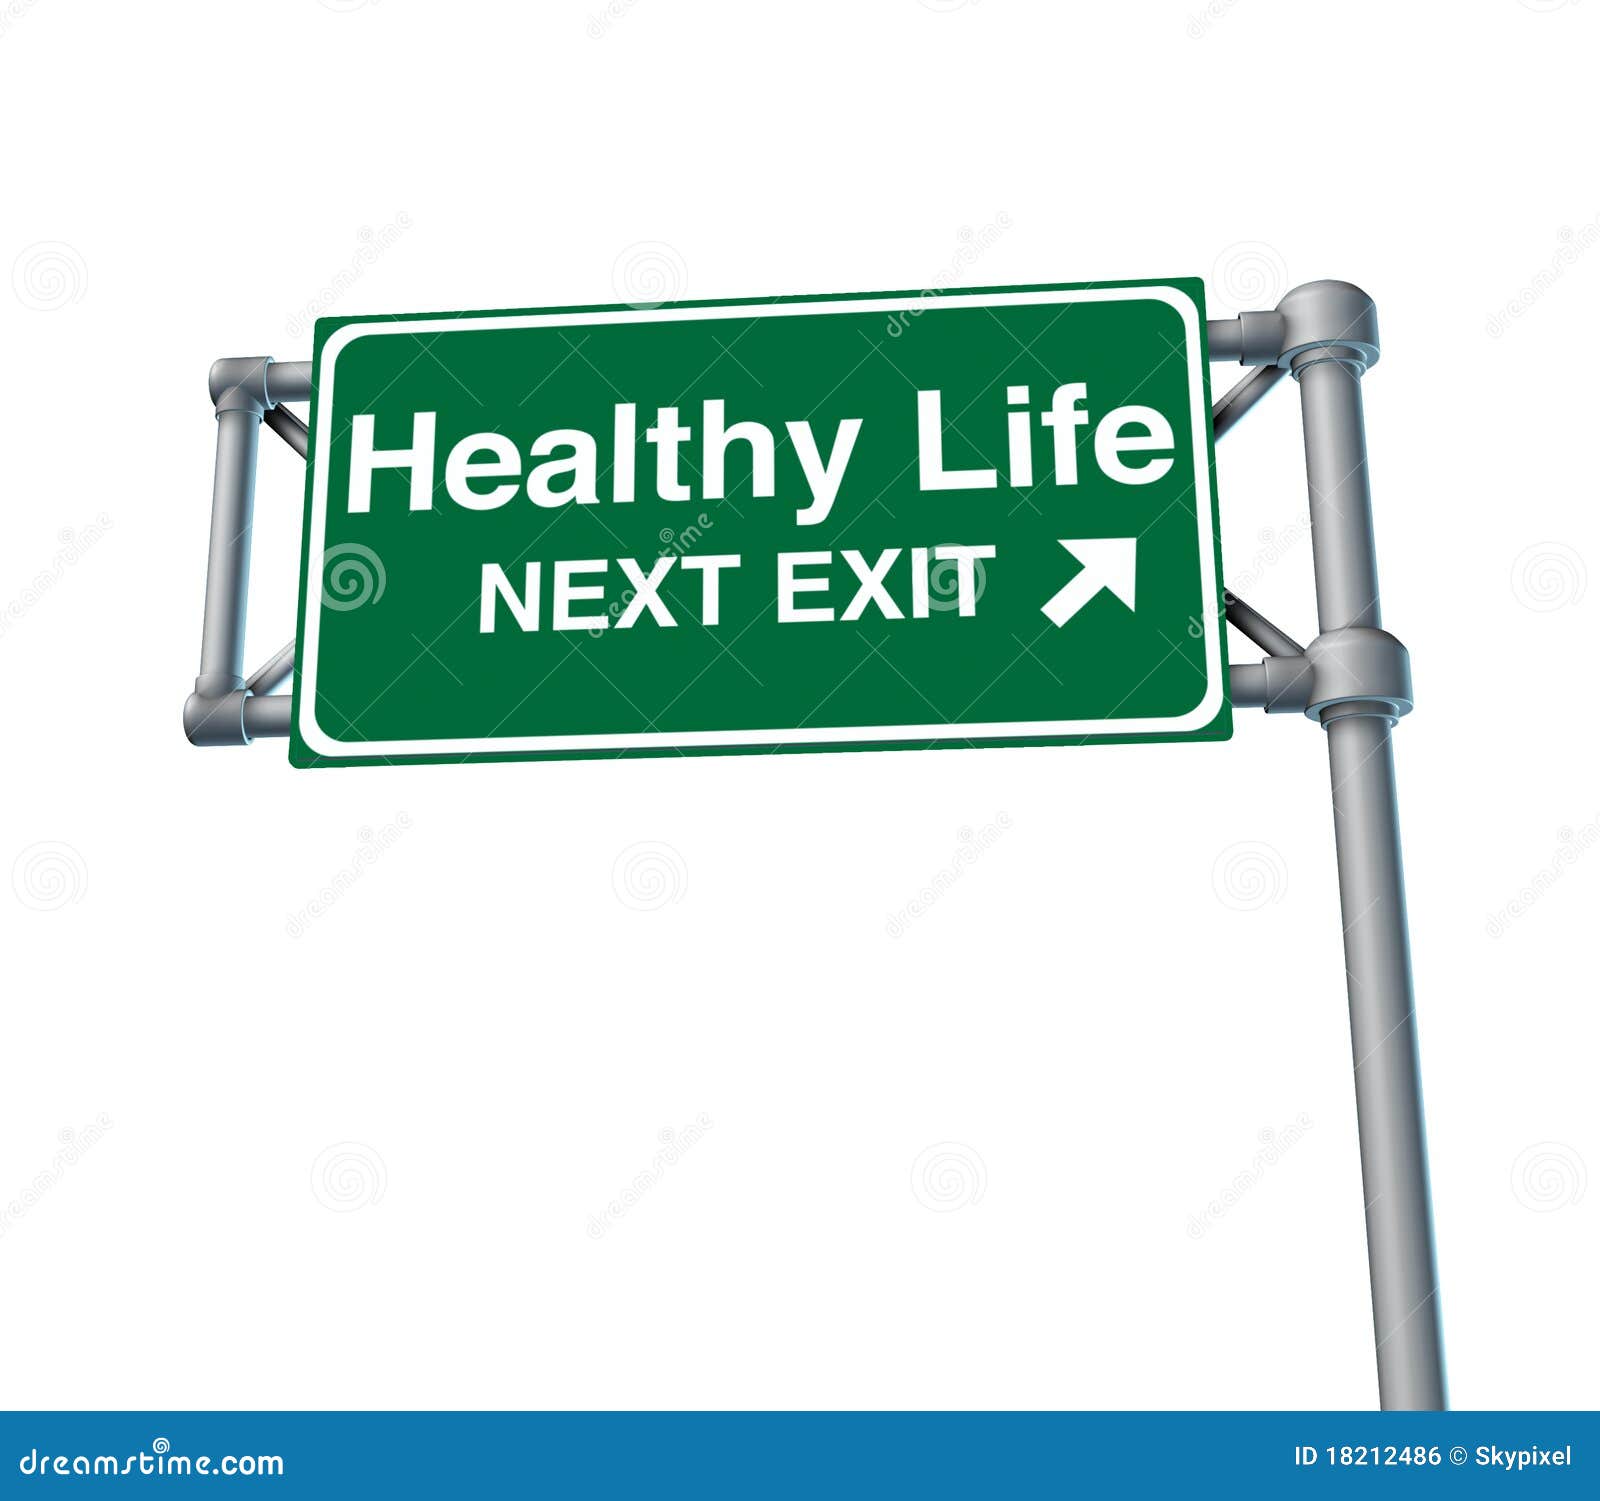 clip art highway exit sign - photo #16